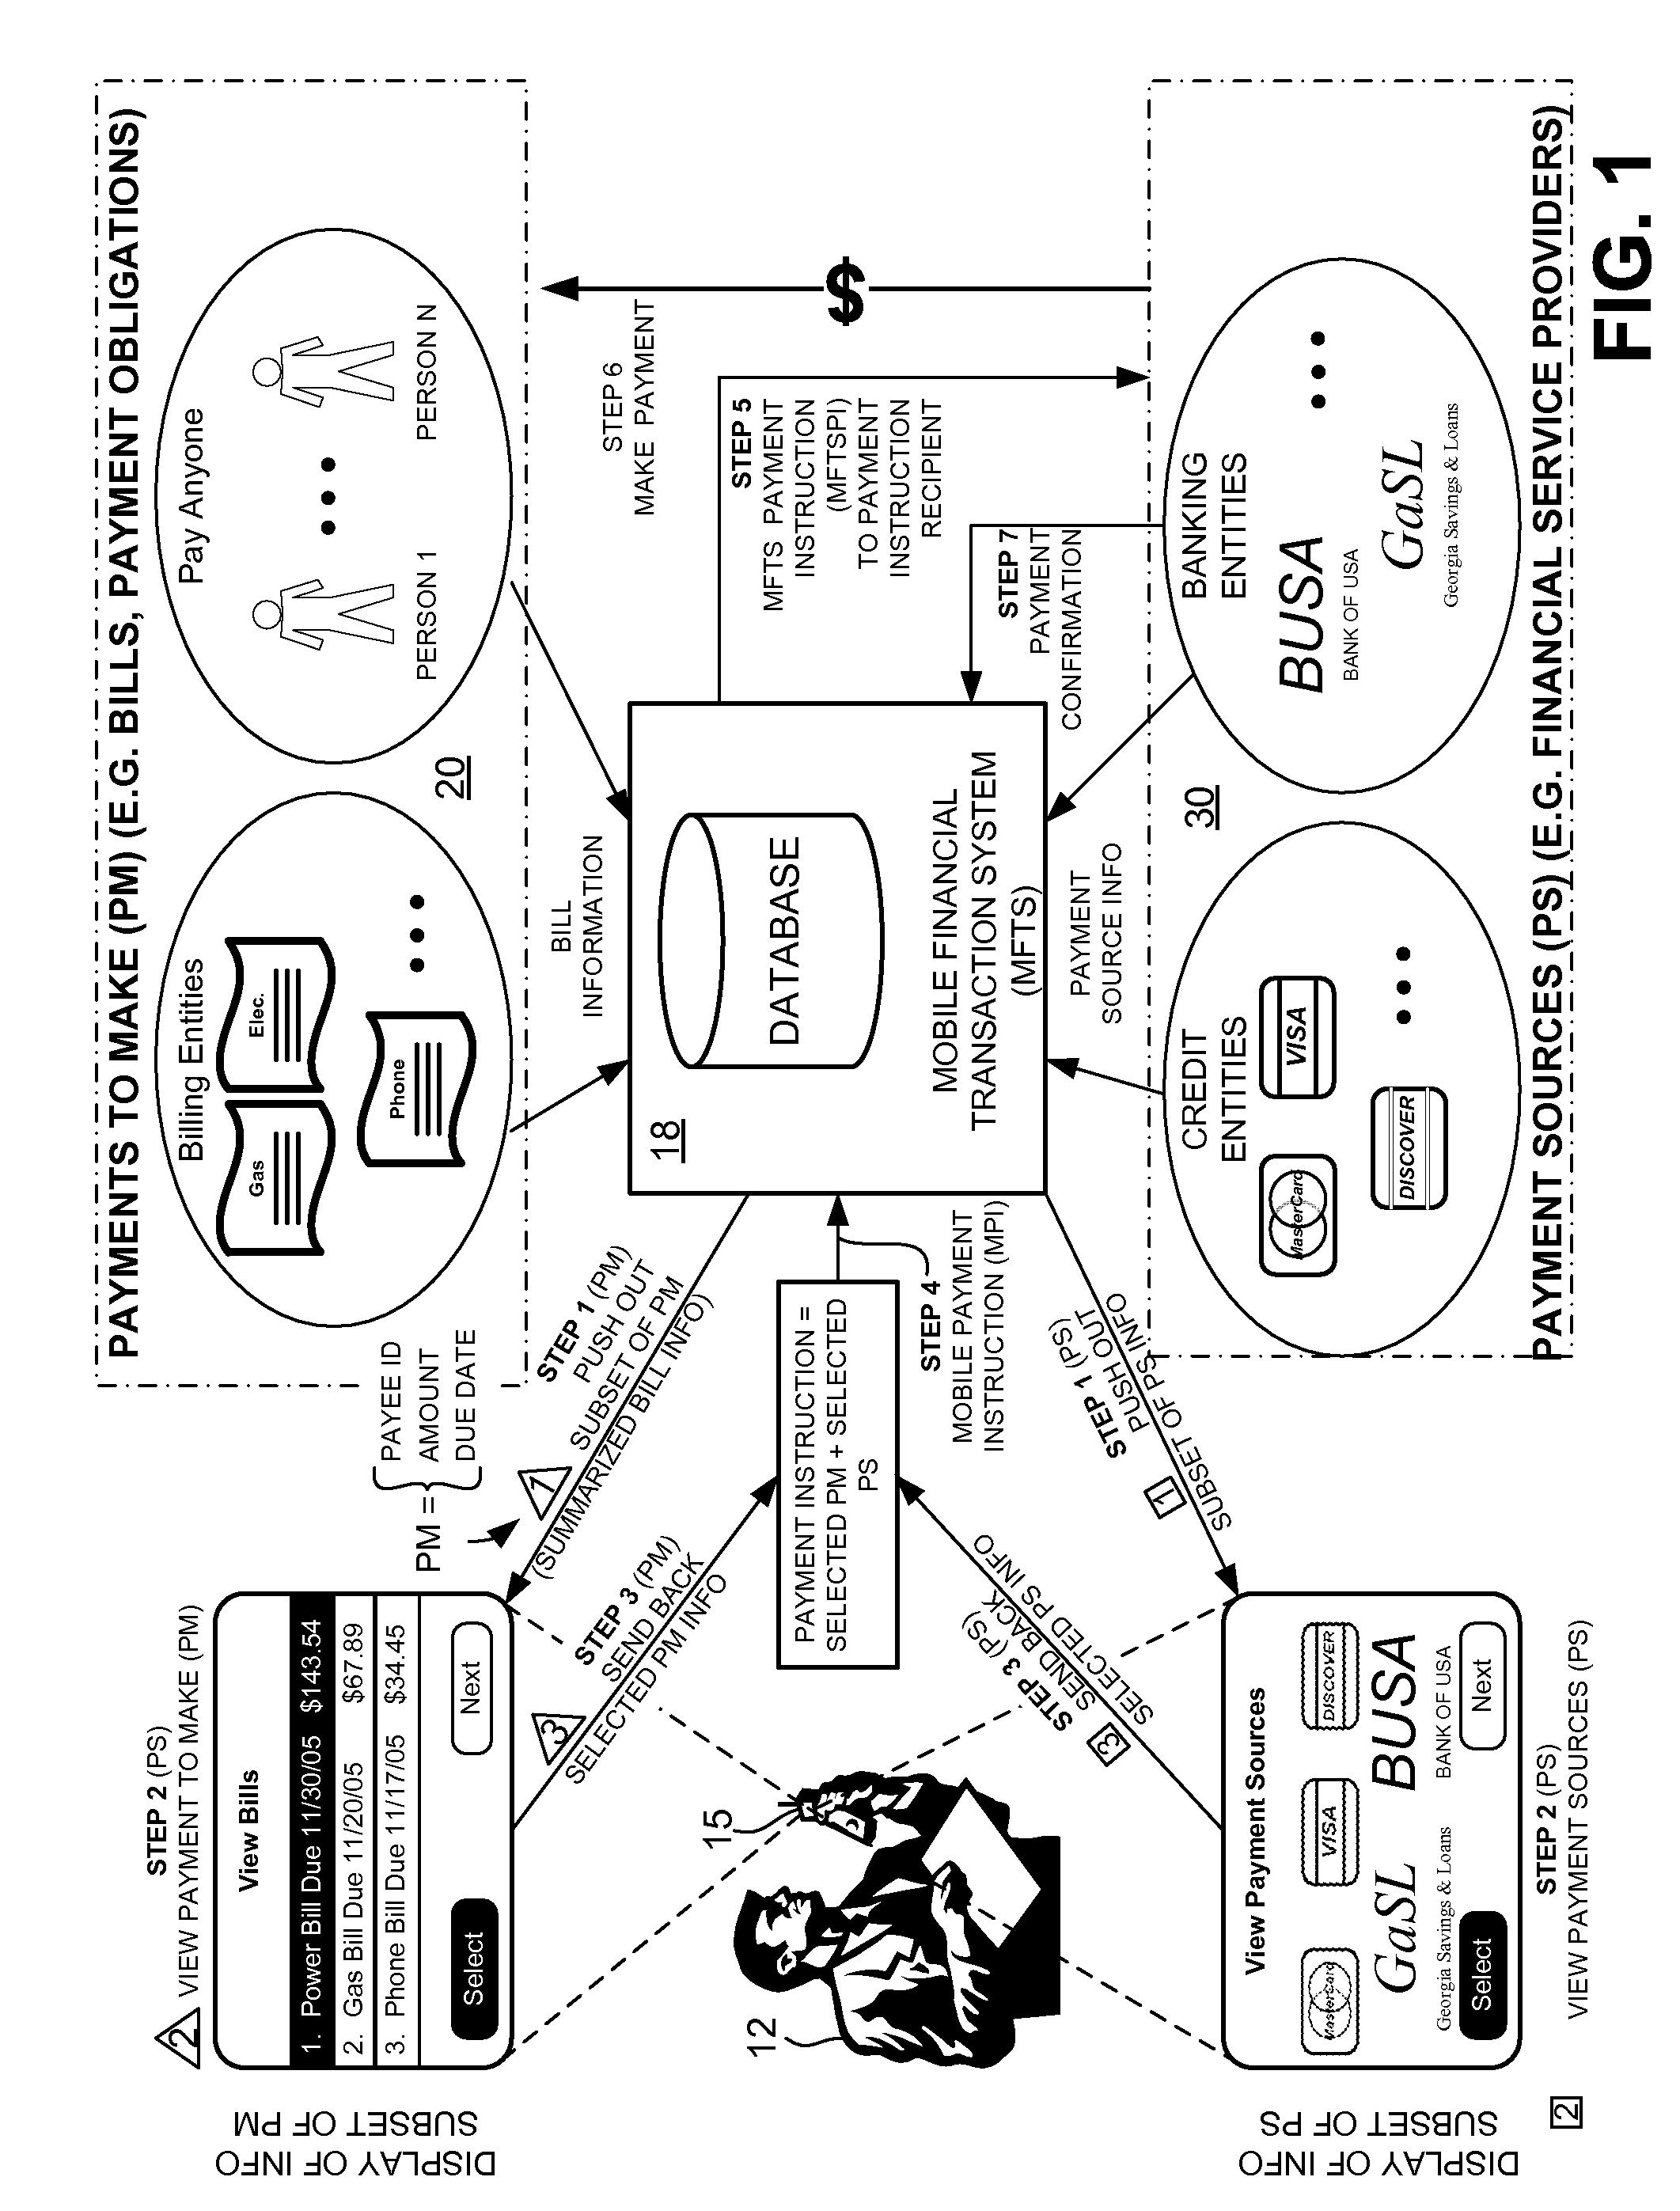 Methods and systems for managing payment sources in a mobile environment